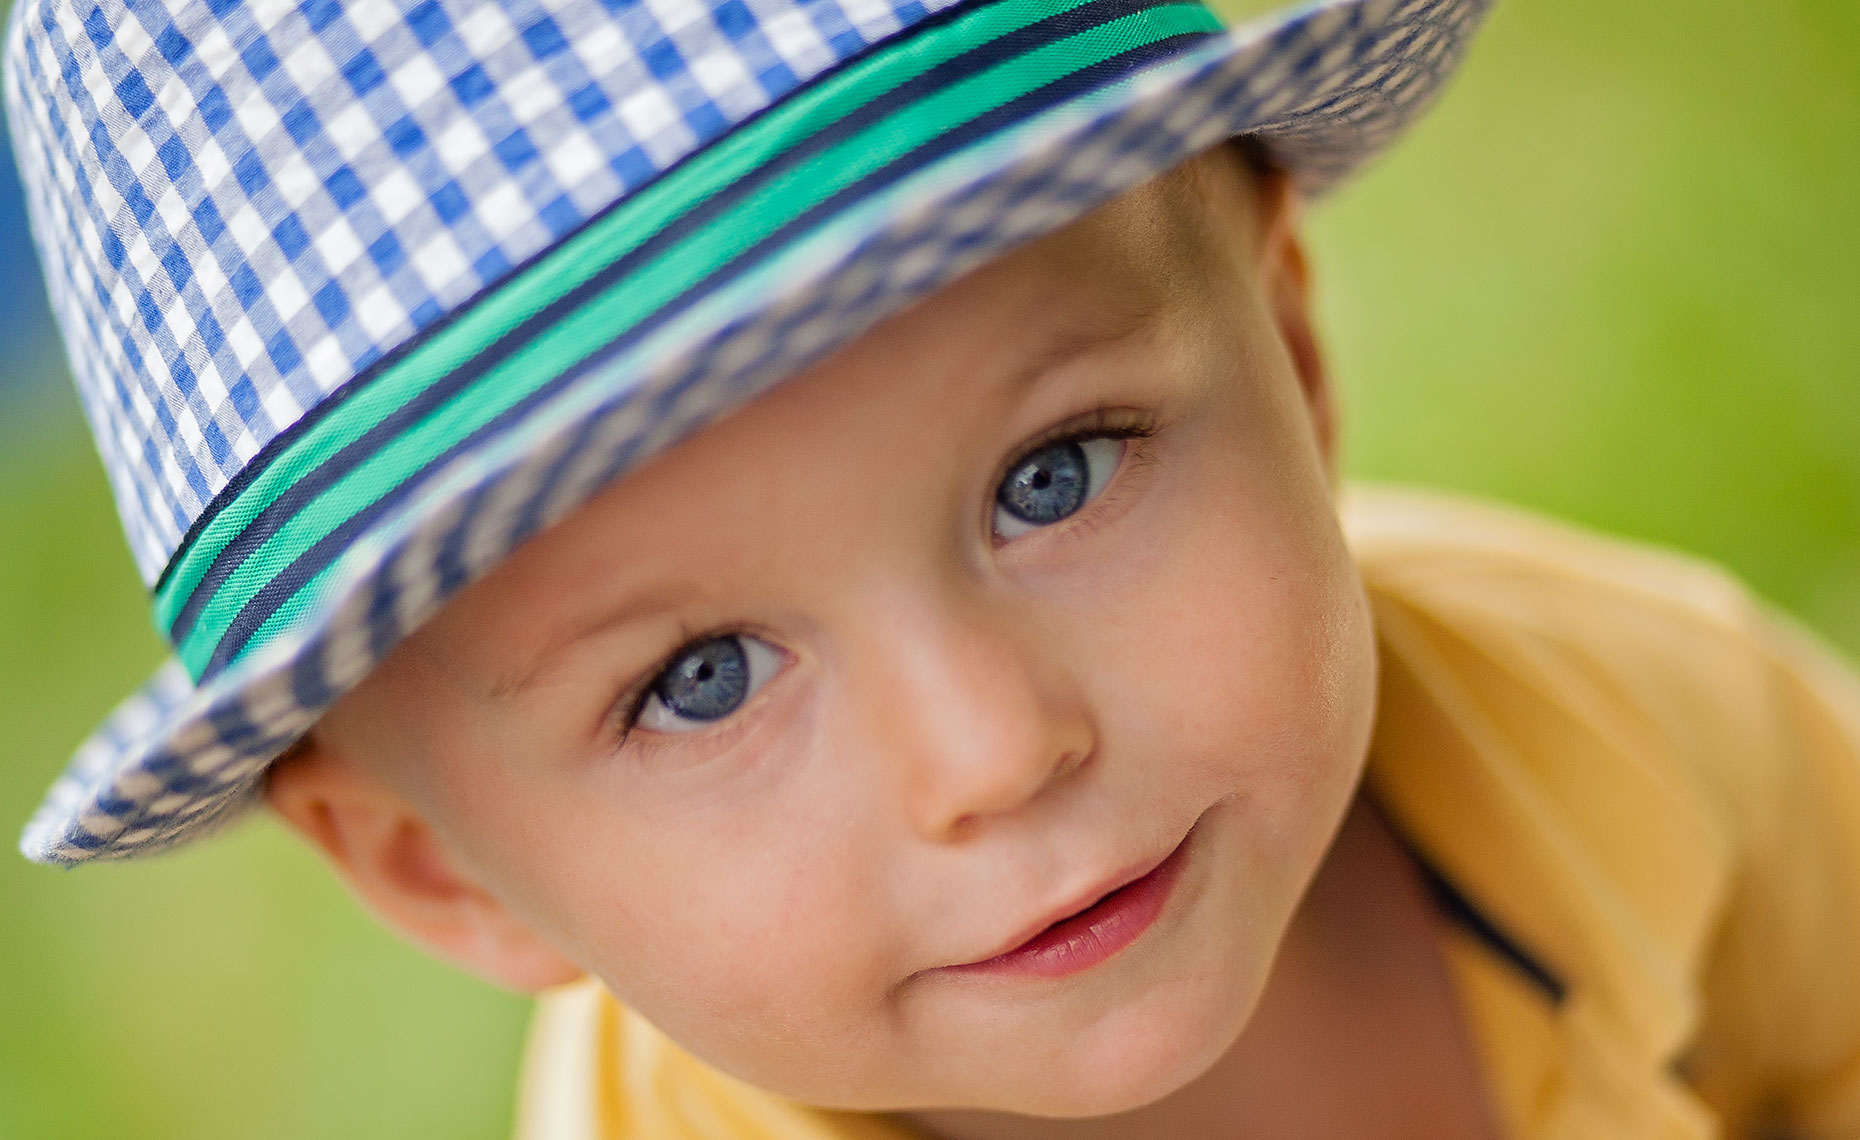 beautiful male child with blue and white hat and blue eyes looking up at camera